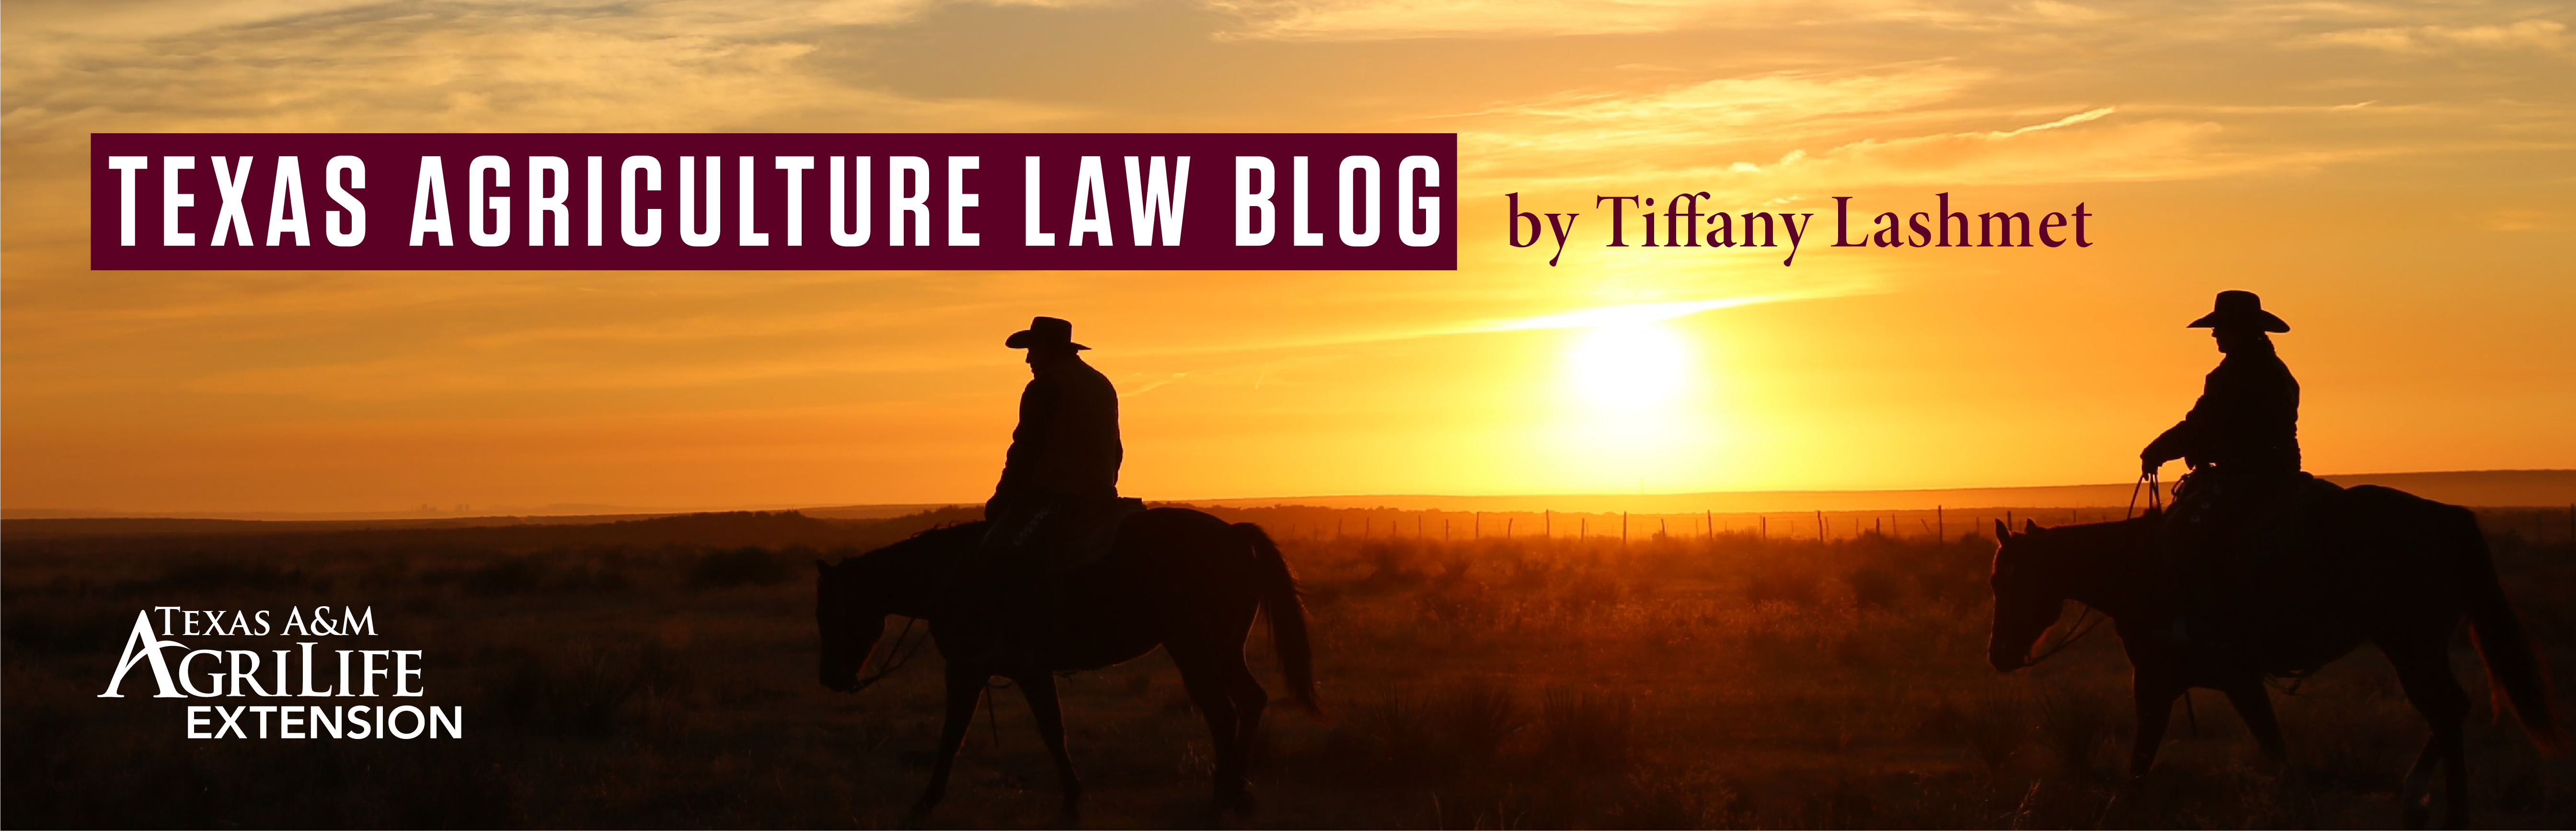 Texas Agriculture Law Blog